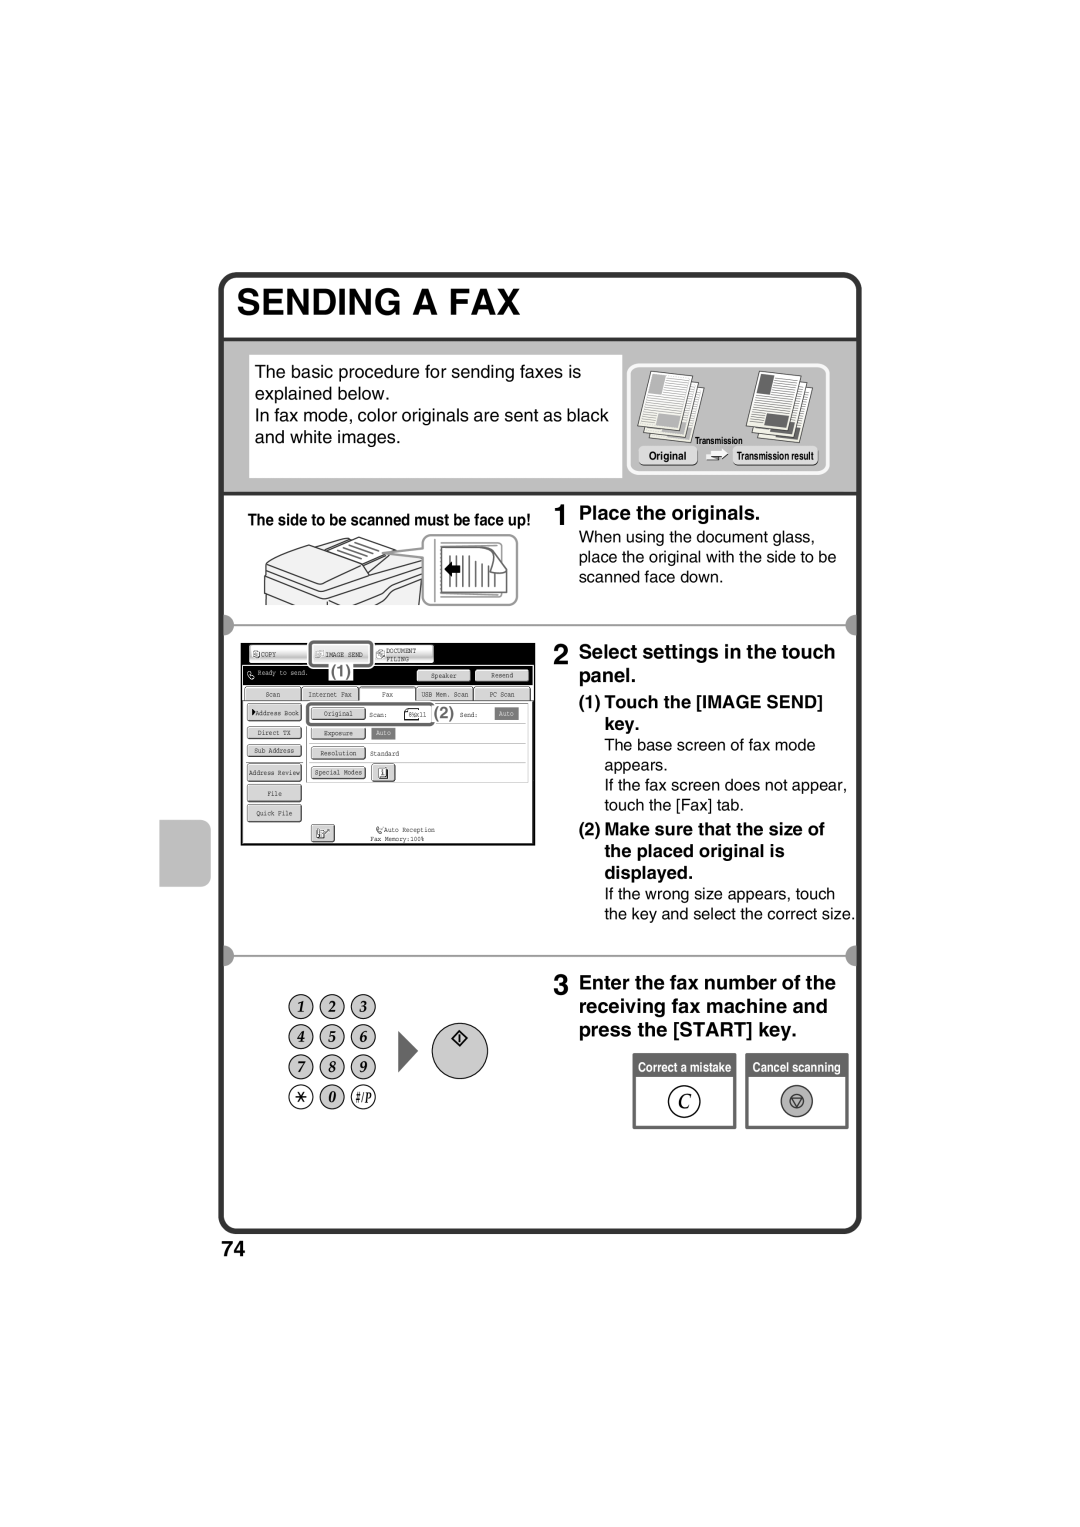 Sharp MX-B401 Sending A Fax, Touch the IMAGE SEND key, Make sure that the size of the placed original is displayed, Auto 